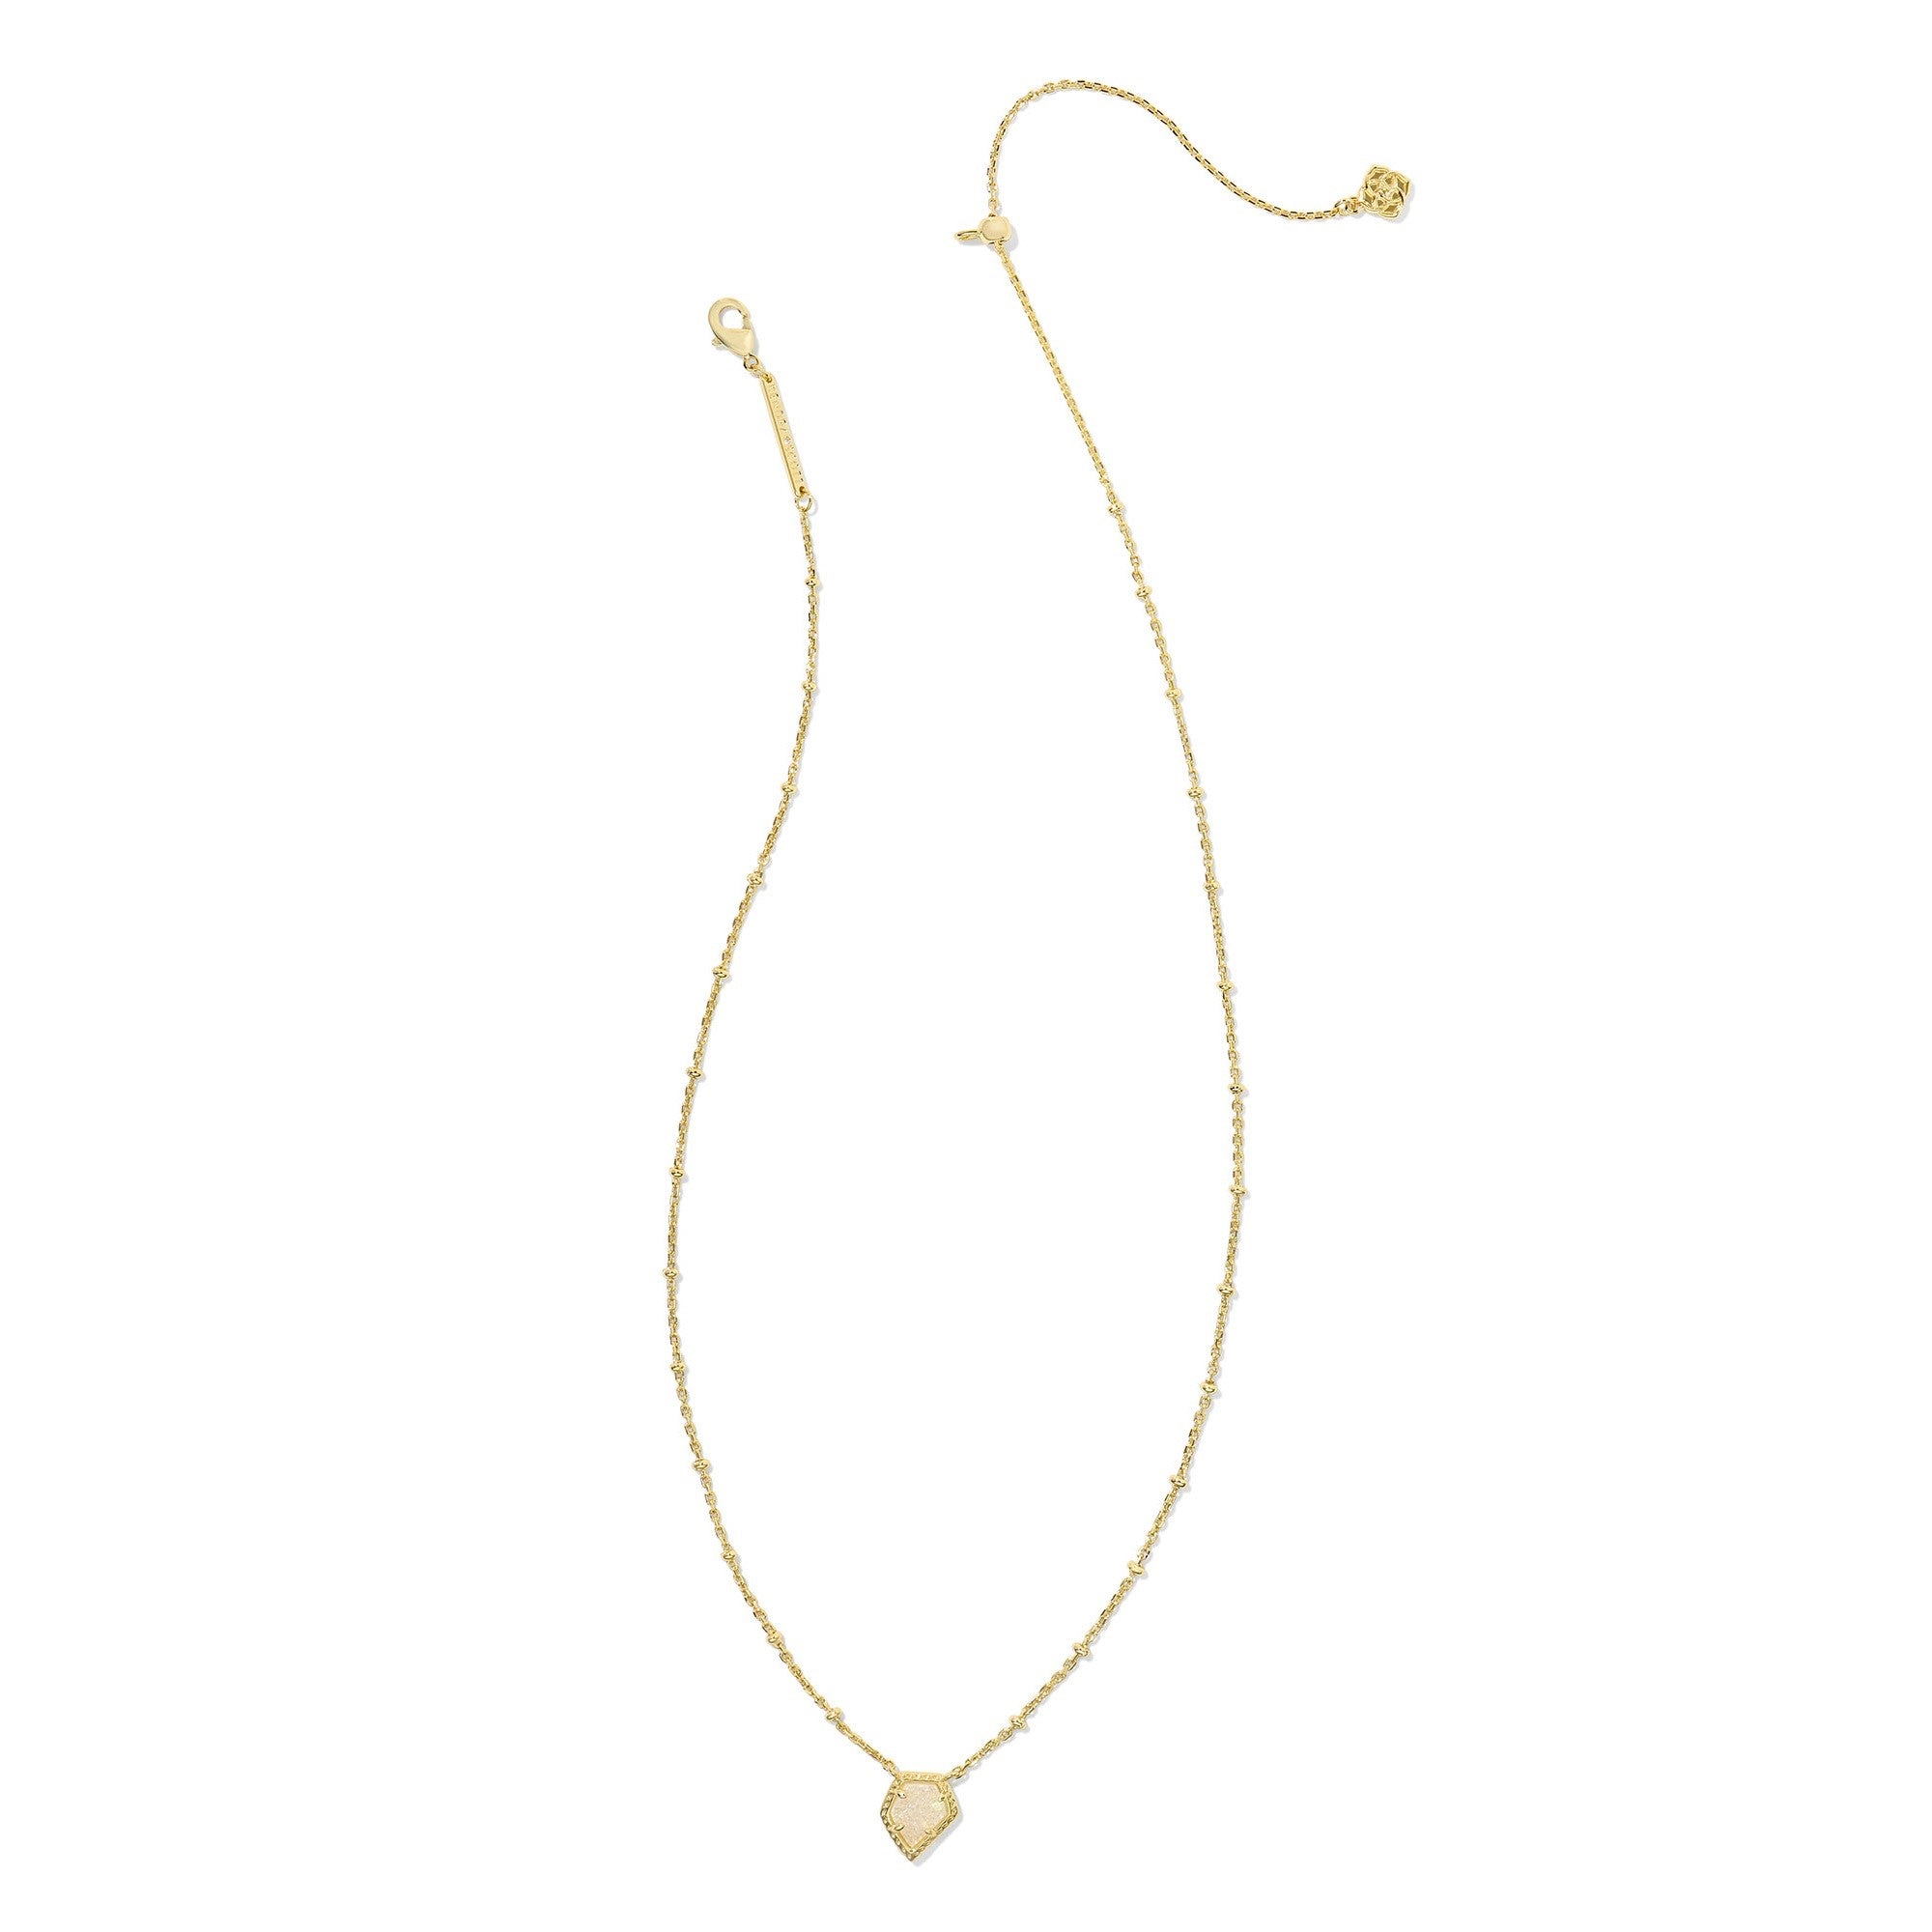 Kendra Scott | Framed Tess Gold Satellite Short Pendant Necklace in Iridescent Drusy - Giddy Up Glamour Boutique